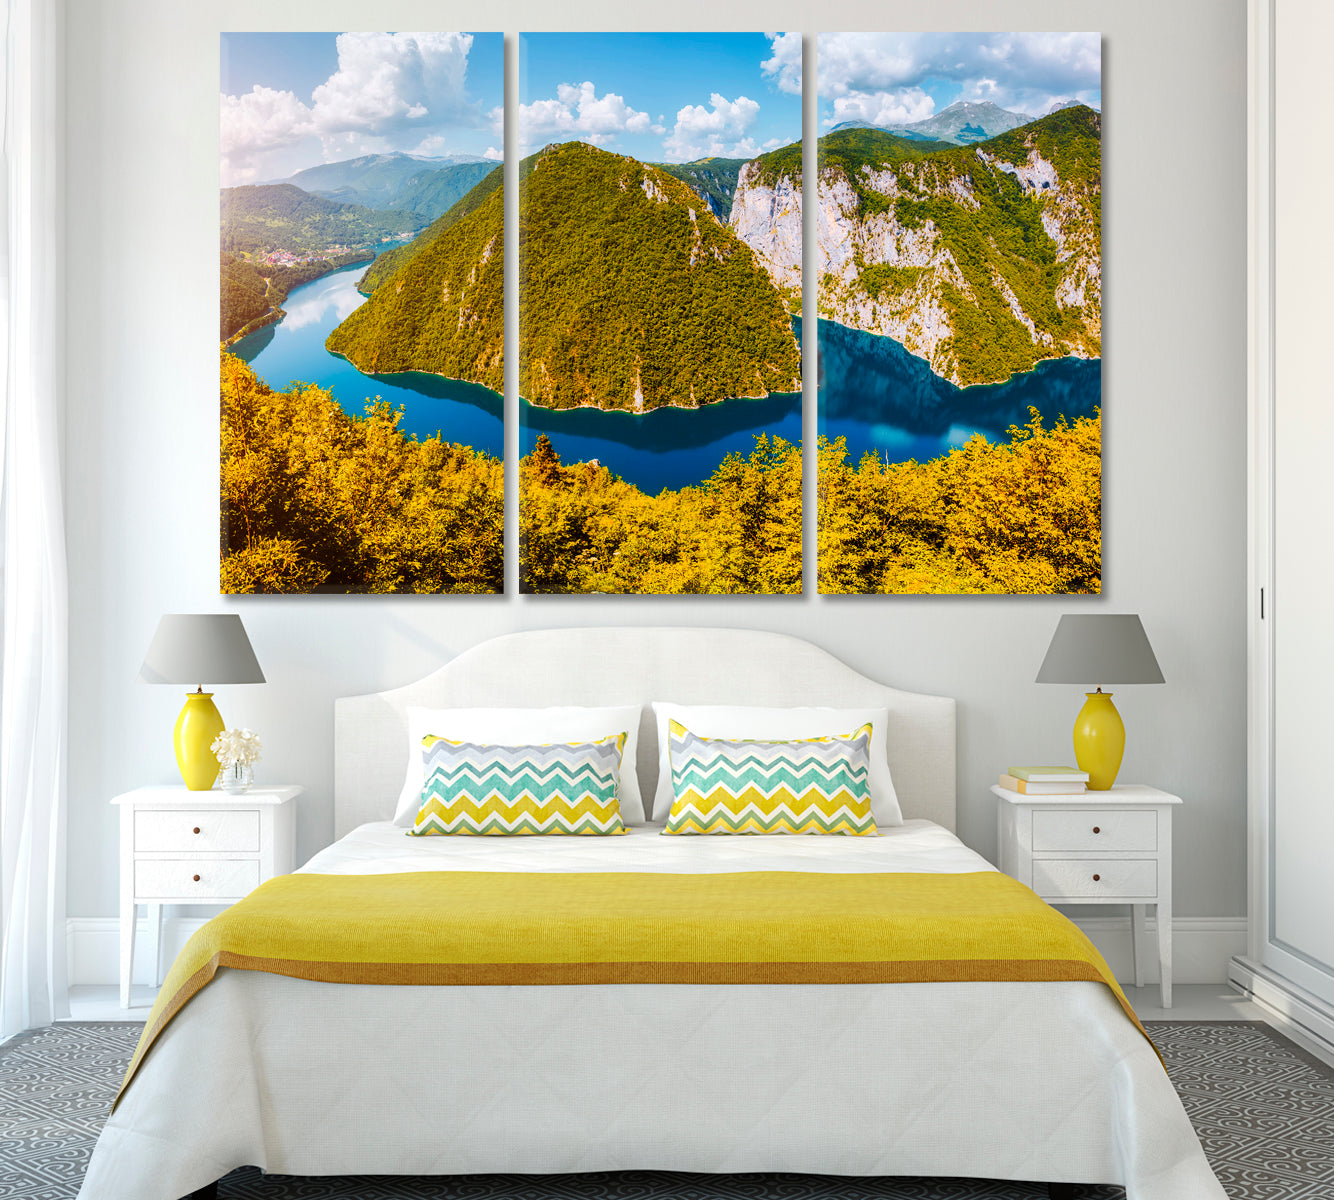 Great Canyon of River Piva Montenegro Canvas Print ArtLexy 3 Panels 36"x24" inches 